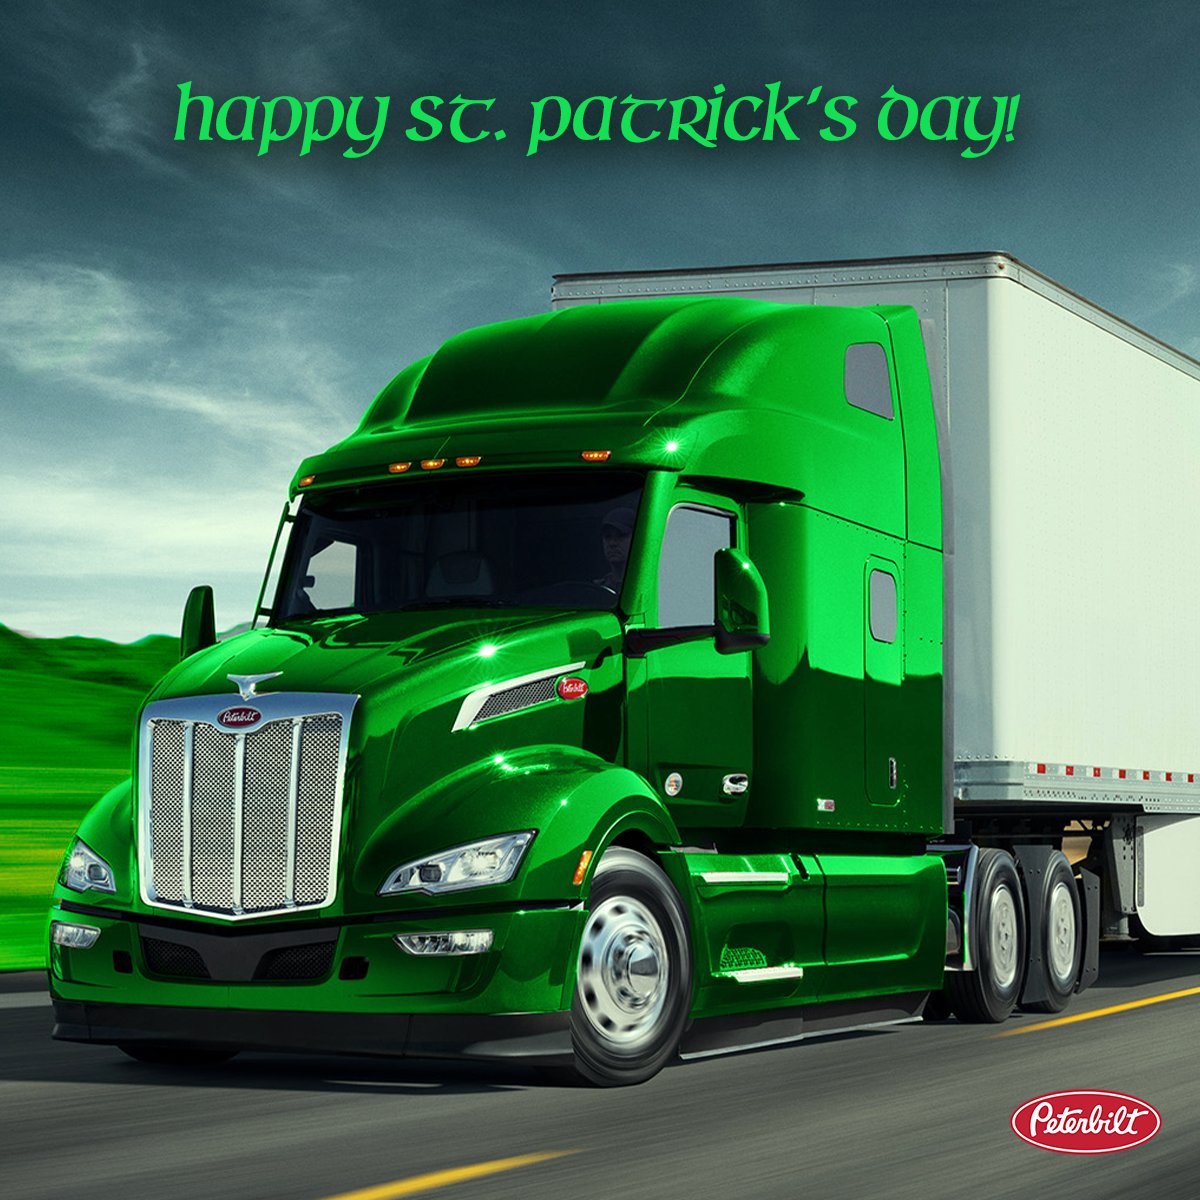 Happy St. Patrick’s Day from all of us at Peterbilt! Wishing you the luck of the Irish and miles of smooth roads ahead. #StPatricksDay #Peterbilt #PeterbiltTrucks #PeterbiltPride #ClassPays